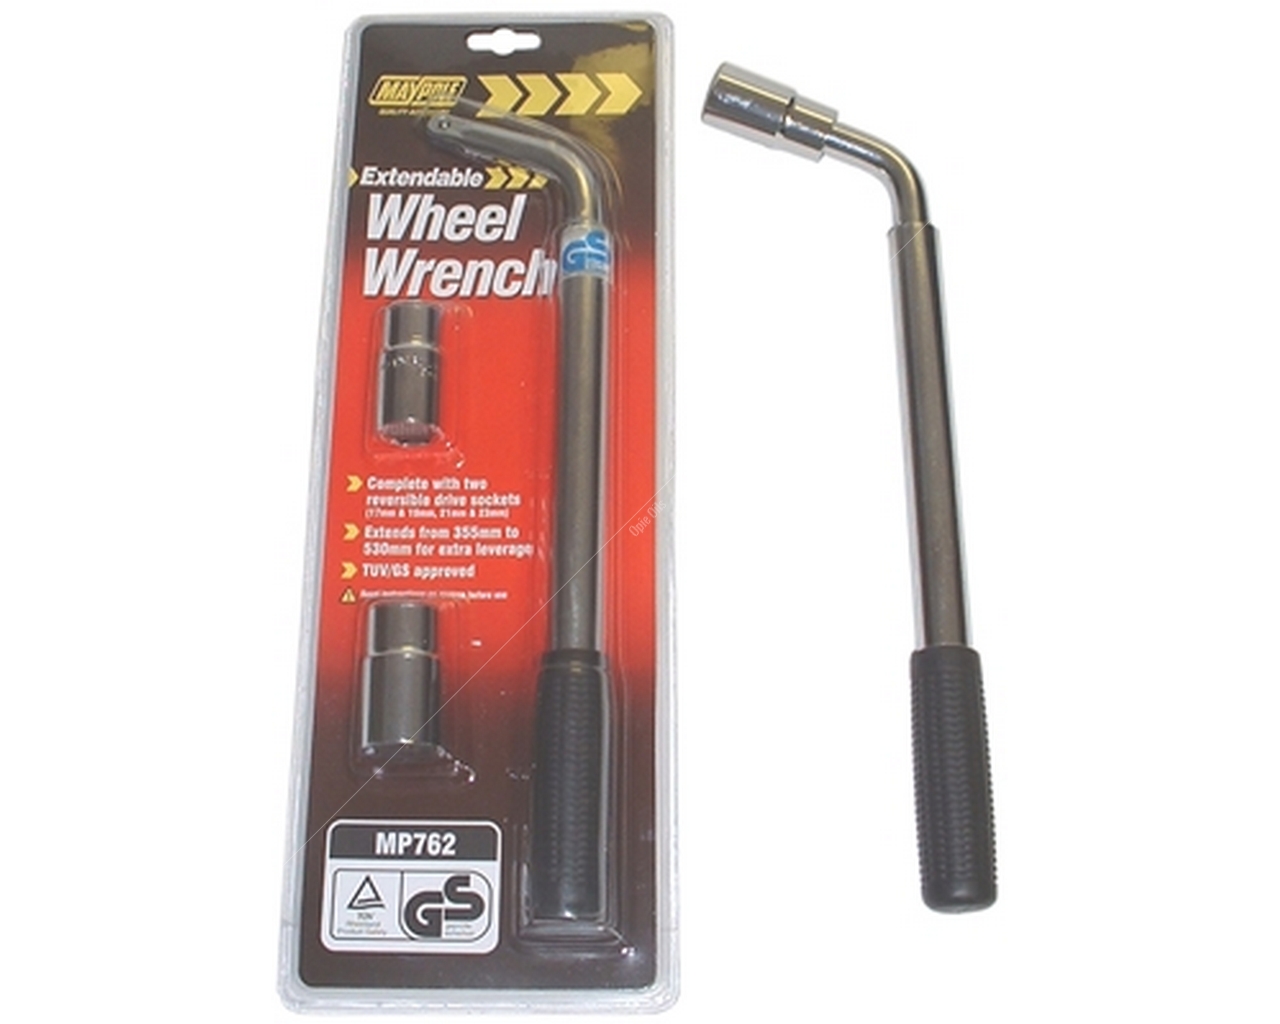 Maypole Extendable Wheel Wrench 762 Camping 